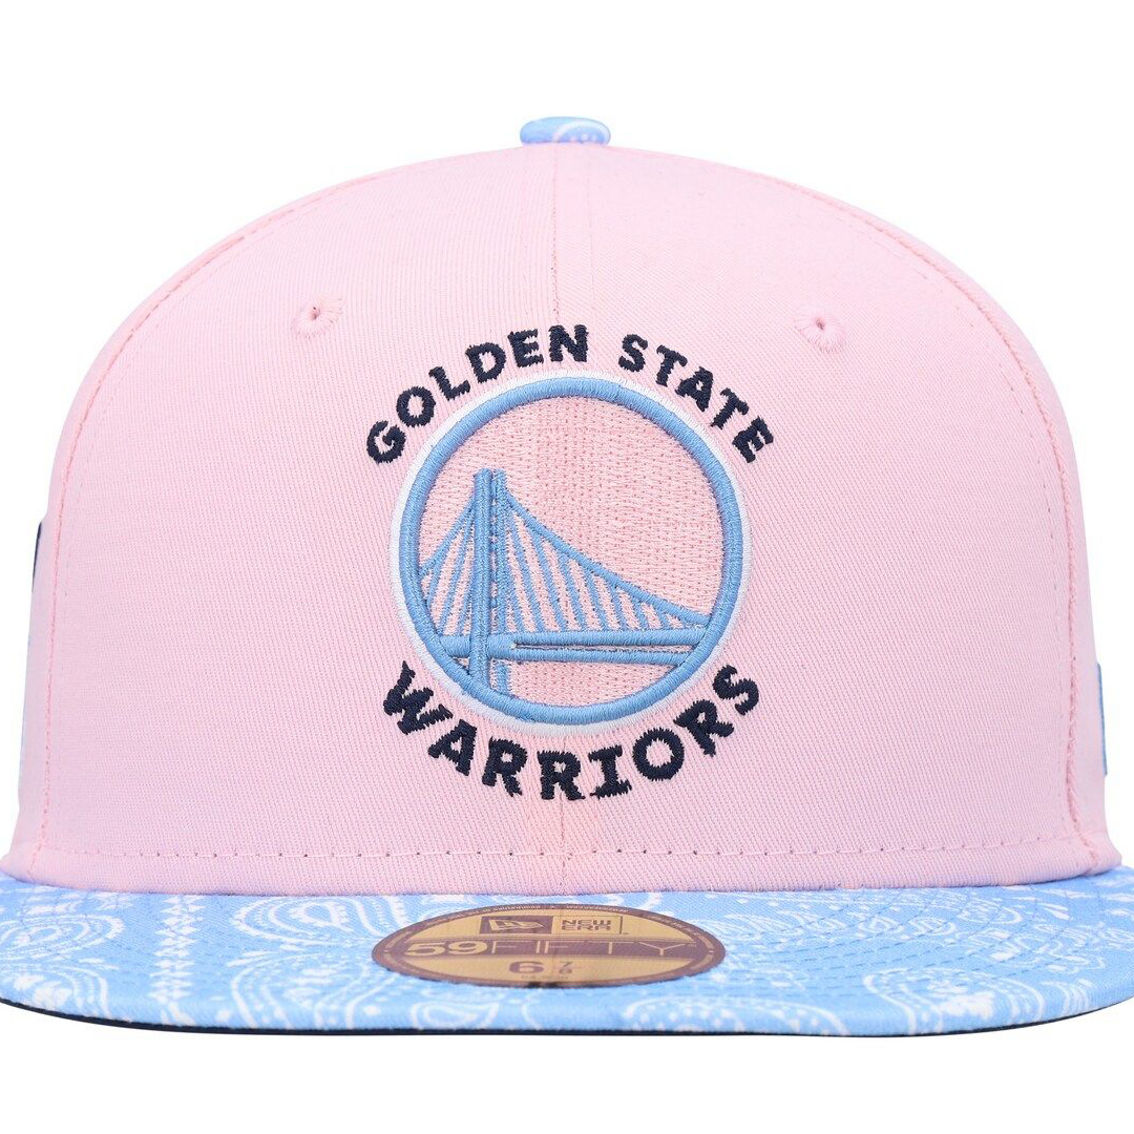 New Era Men's Pink/Light Blue Golden State Warriors Paisley Visor 59FIFTY Fitted Hat - Image 3 of 4